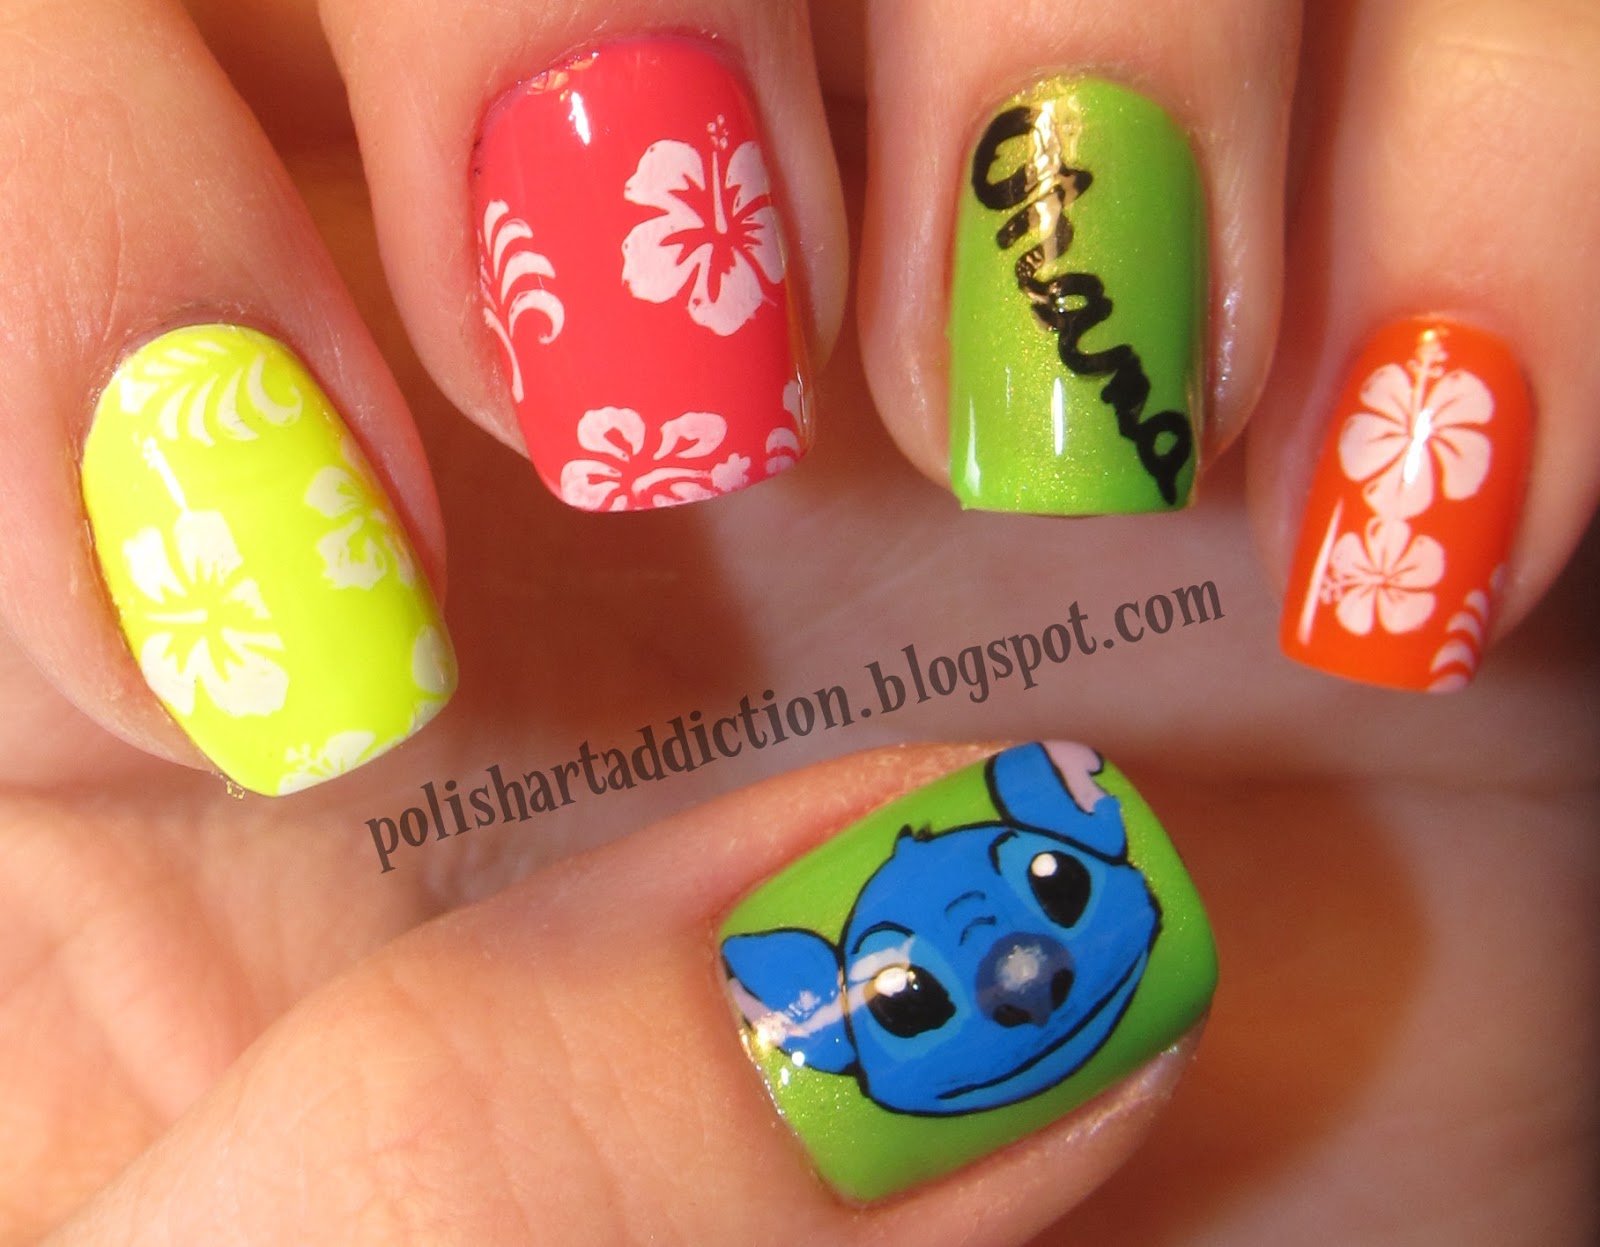 3. Lilo and Stitch Inspired Nail Art - wide 5